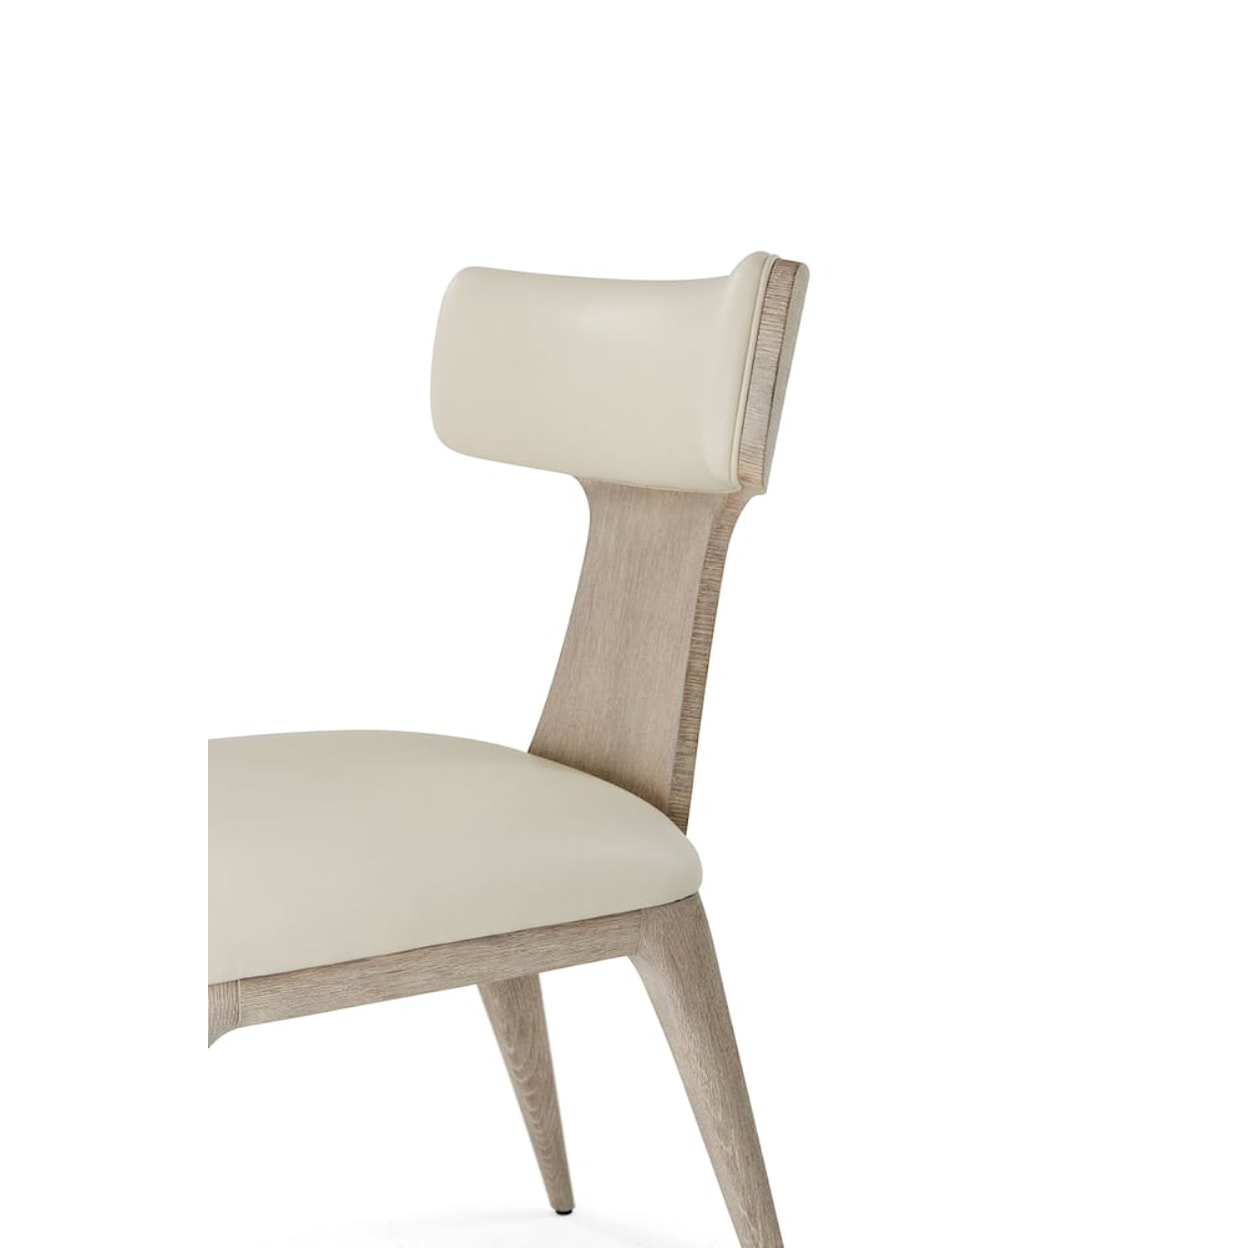 Theodore Alexander Repose Upholstered Dining Side Chair